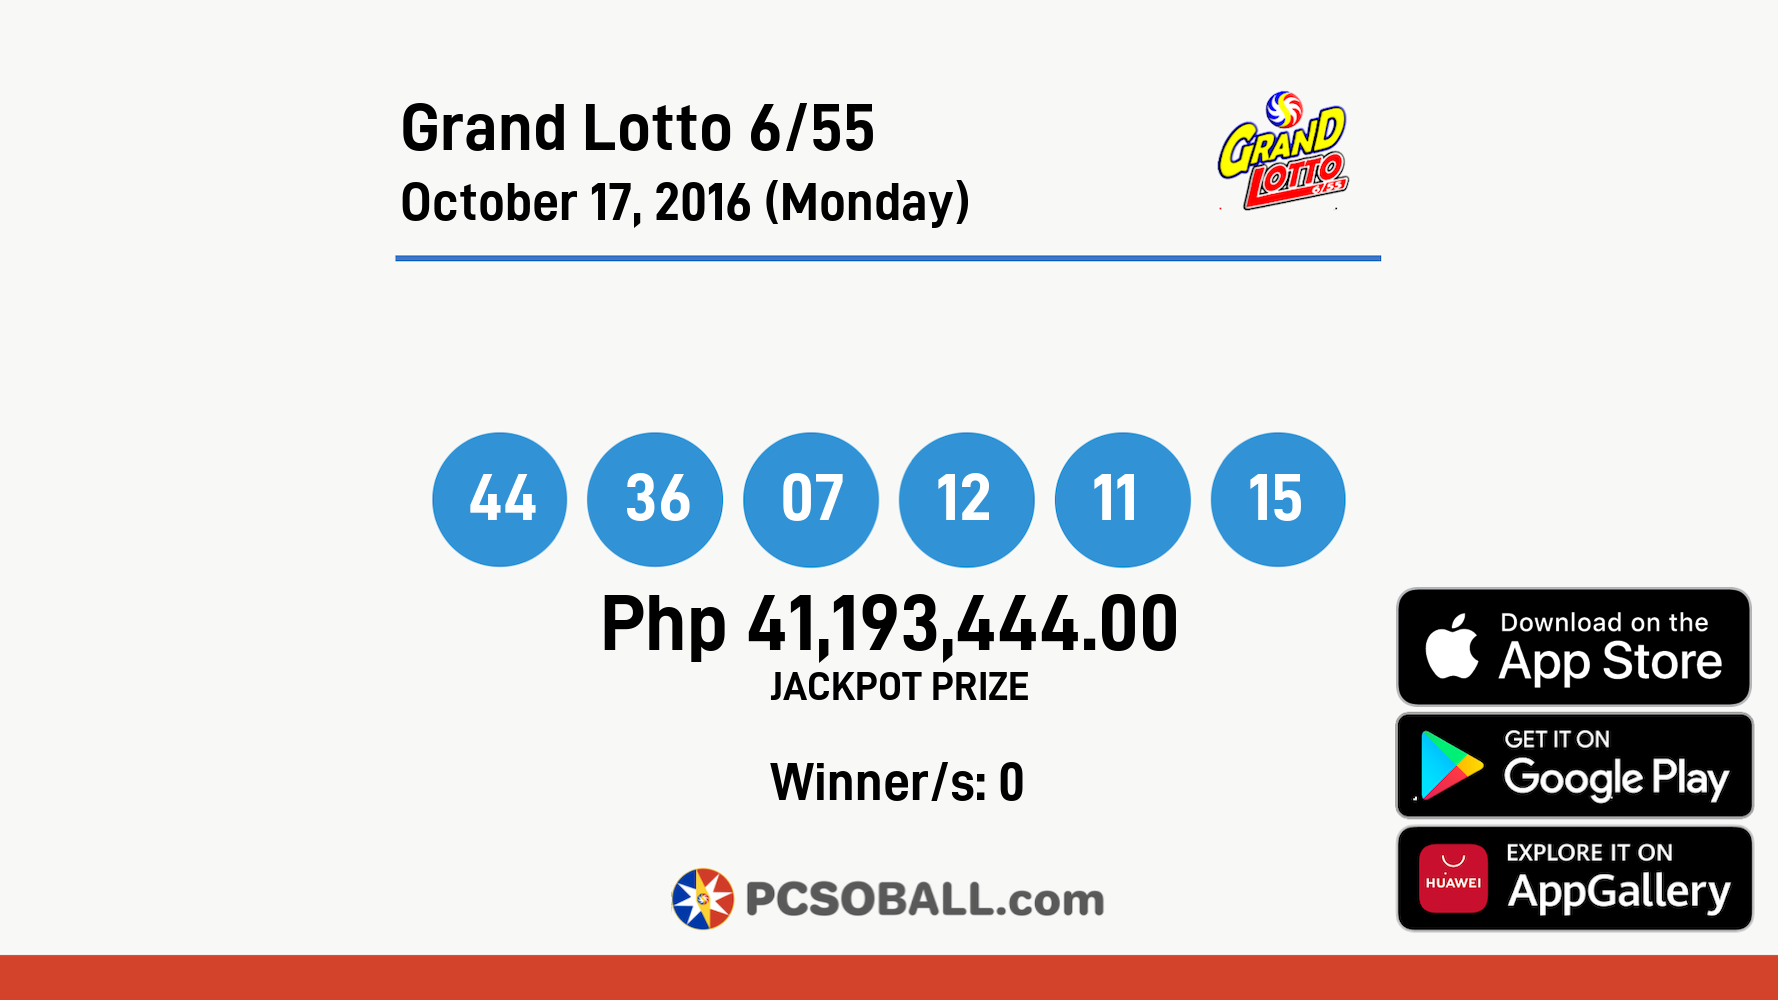 Grand Lotto 6/55 October 17, 2016 (Monday) Result